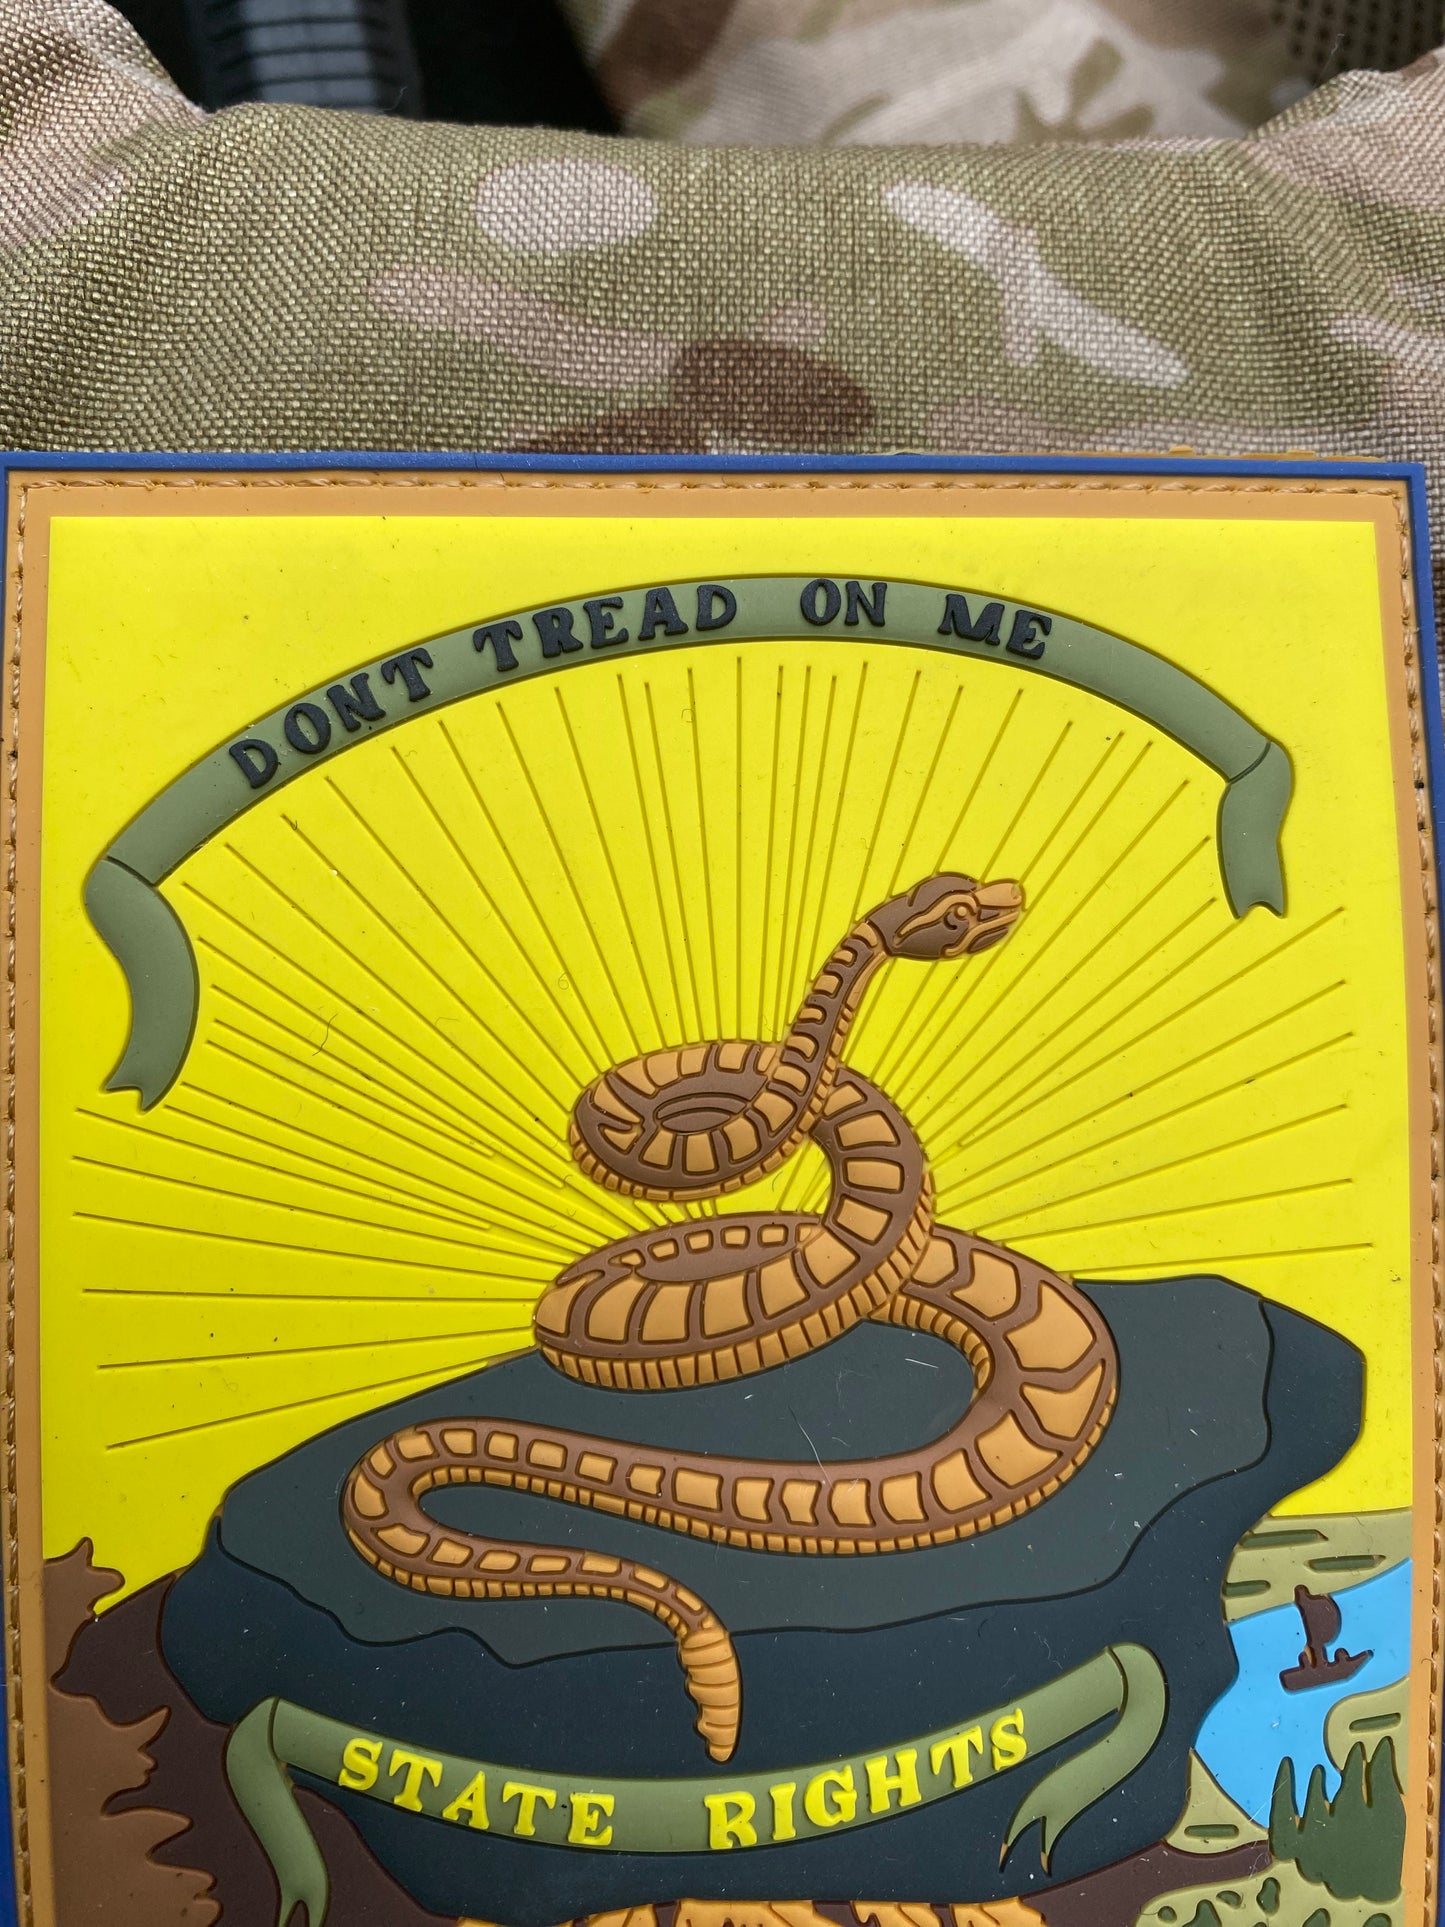 Don't Tread on Me - State Rights  - Georgia Secession Flag PVC Patch